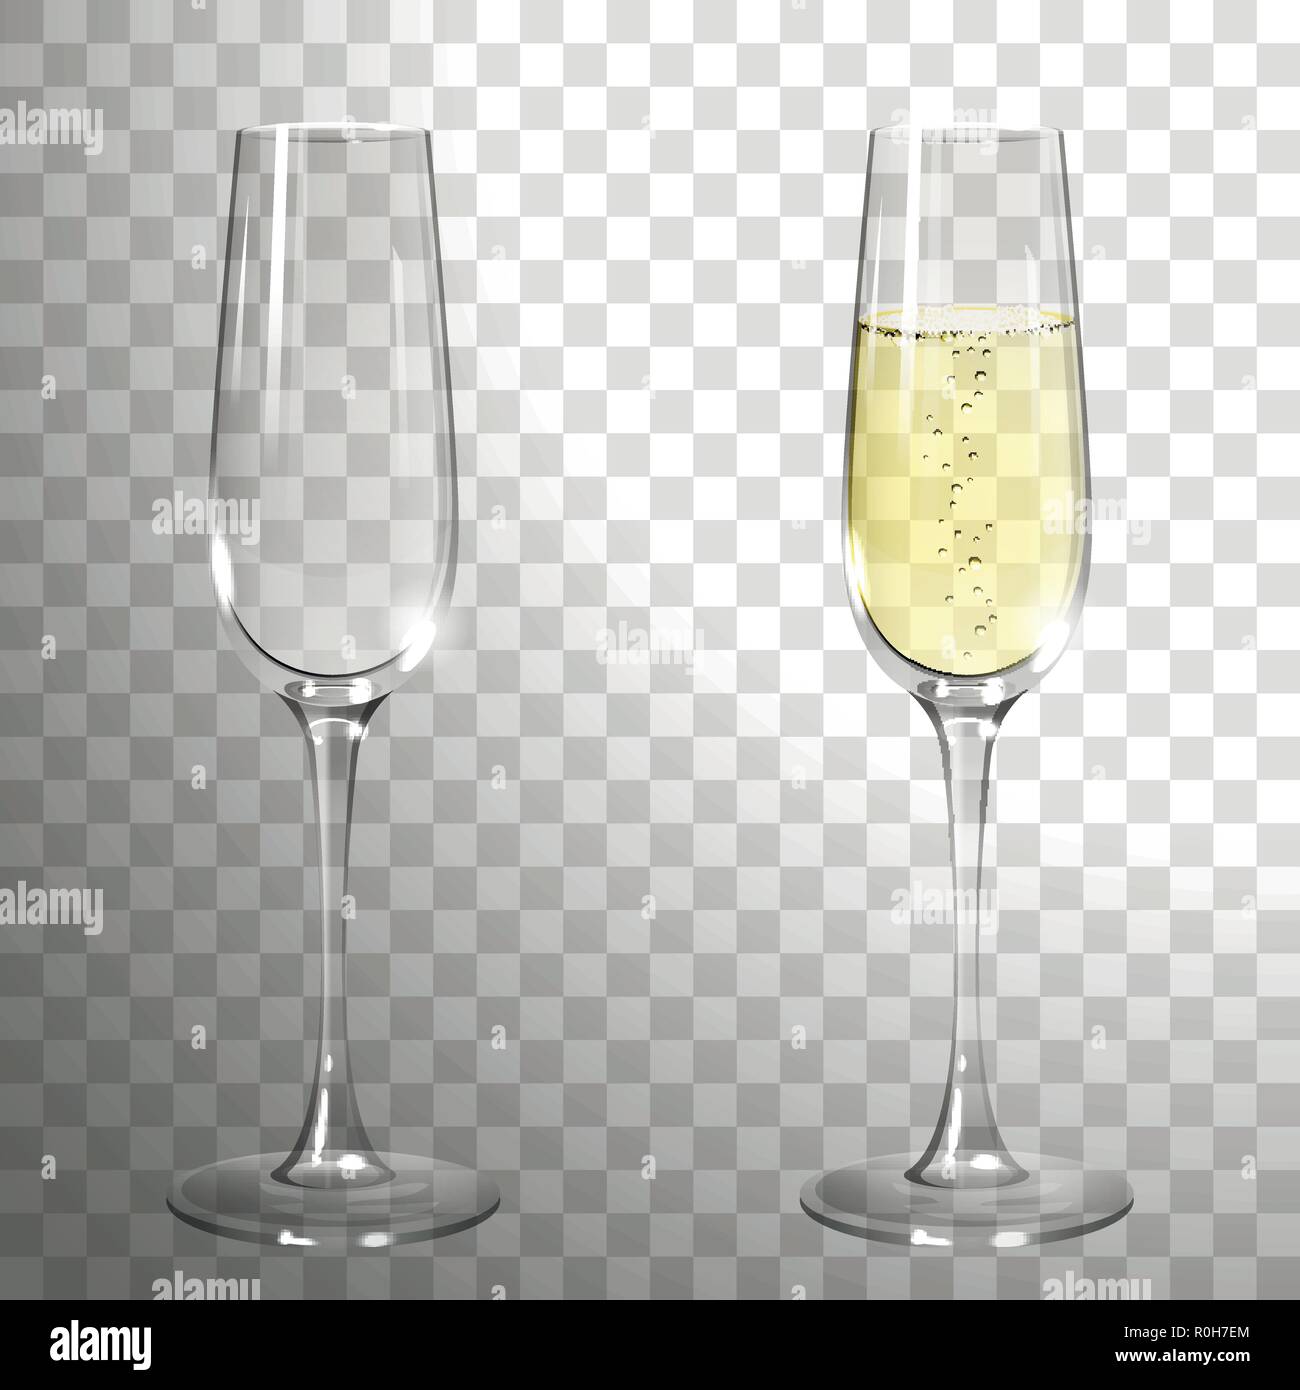 glass of champagne on a transparent background Stock Vector